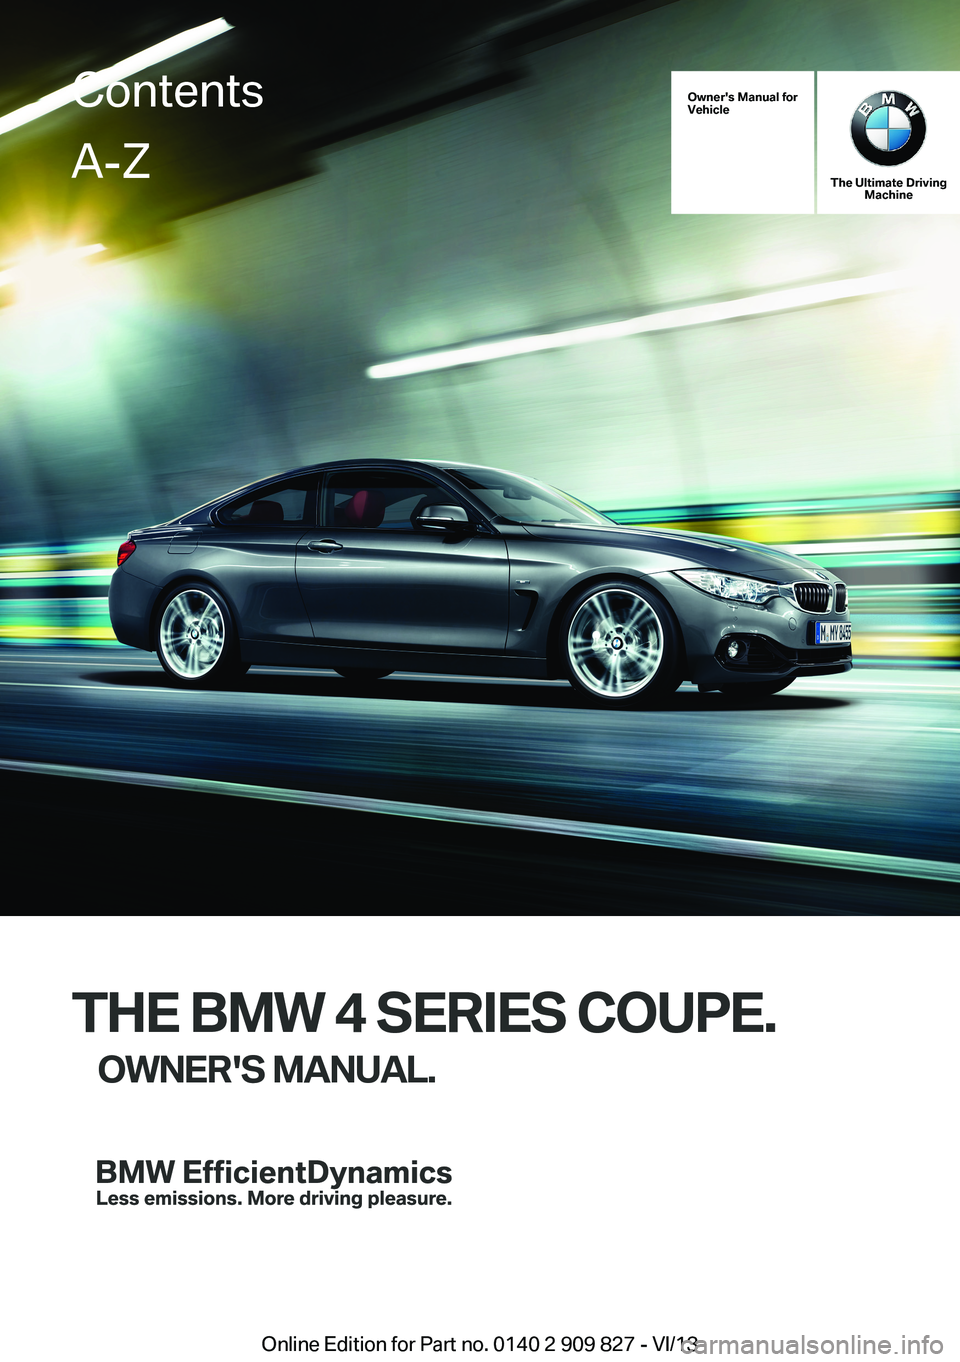 BMW 428I COUPE 2014  Owners Manual Owner's Manual forVehicle
The Ultimate DrivingMachine
THE BMW 4 SERIES COUPE.
OWNER'S MANUAL.ContentsA-Z
Online Edition for Part no. 0140 2 909 827 - VI/13   